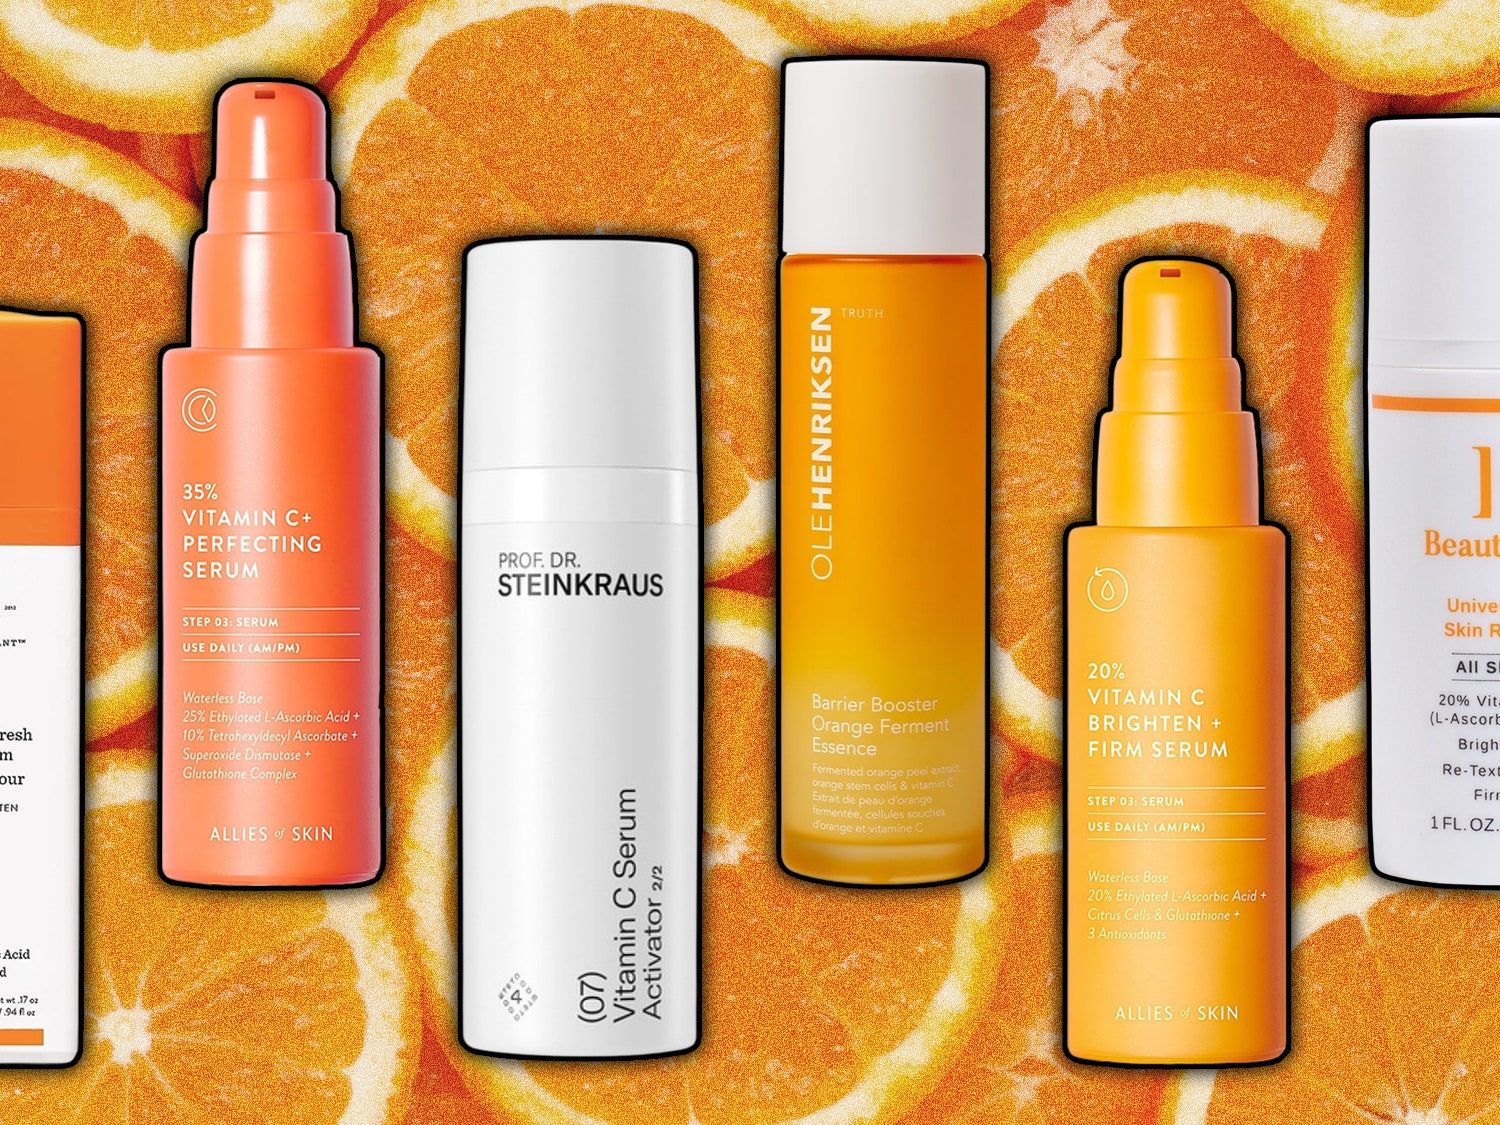 These Vitamin C Serums Are Your Skincare Secret Weapons